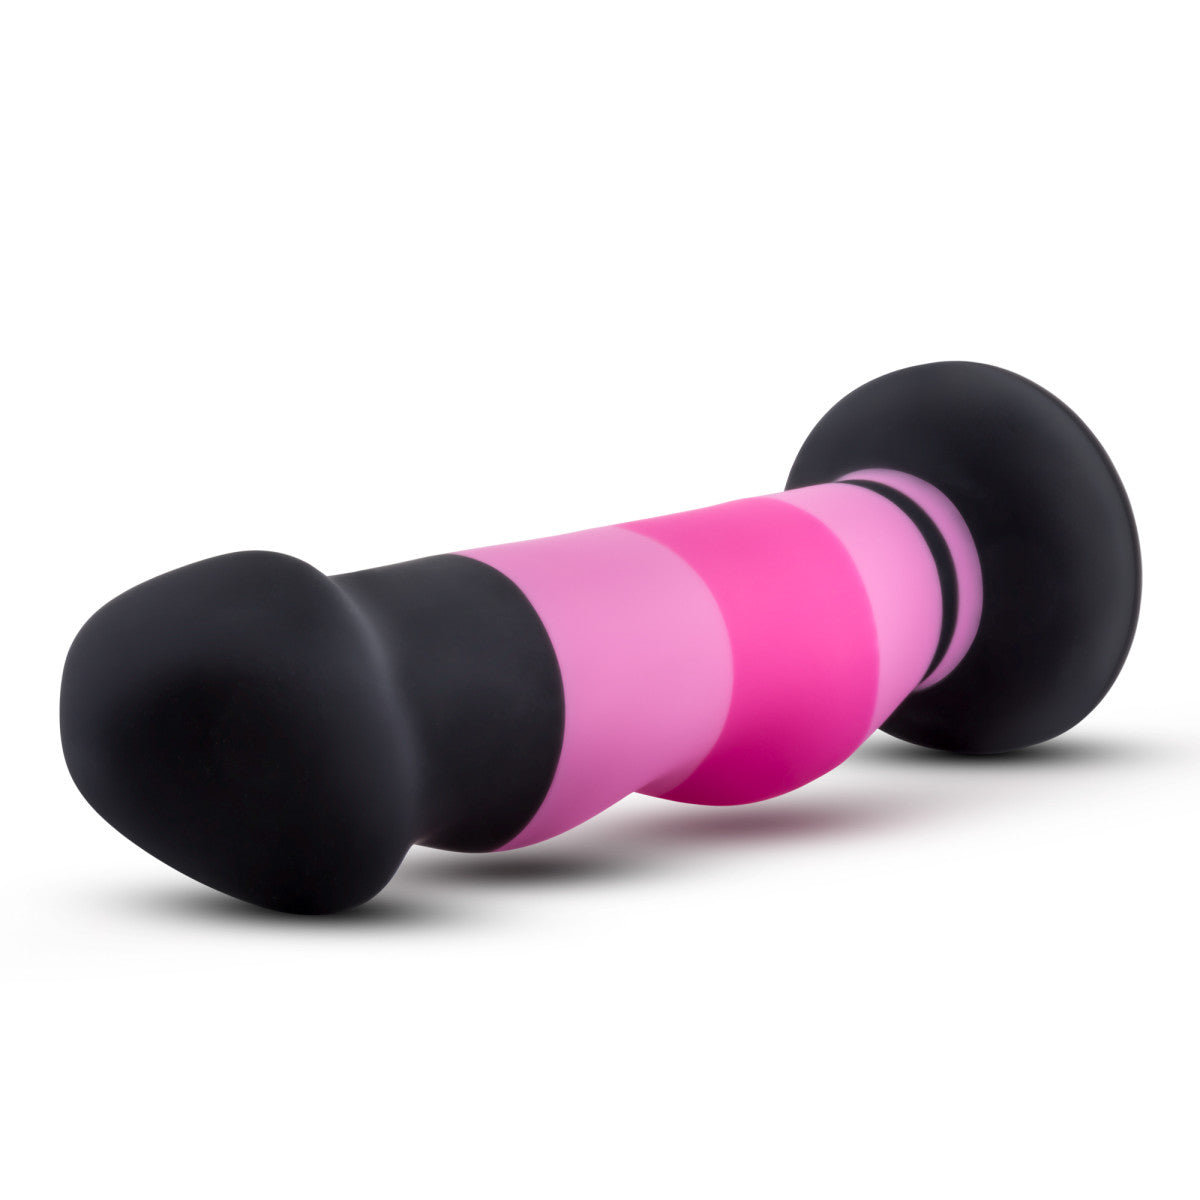 Avant D4 sexy dildo with black, light pink, and hot pink horizontal stripes